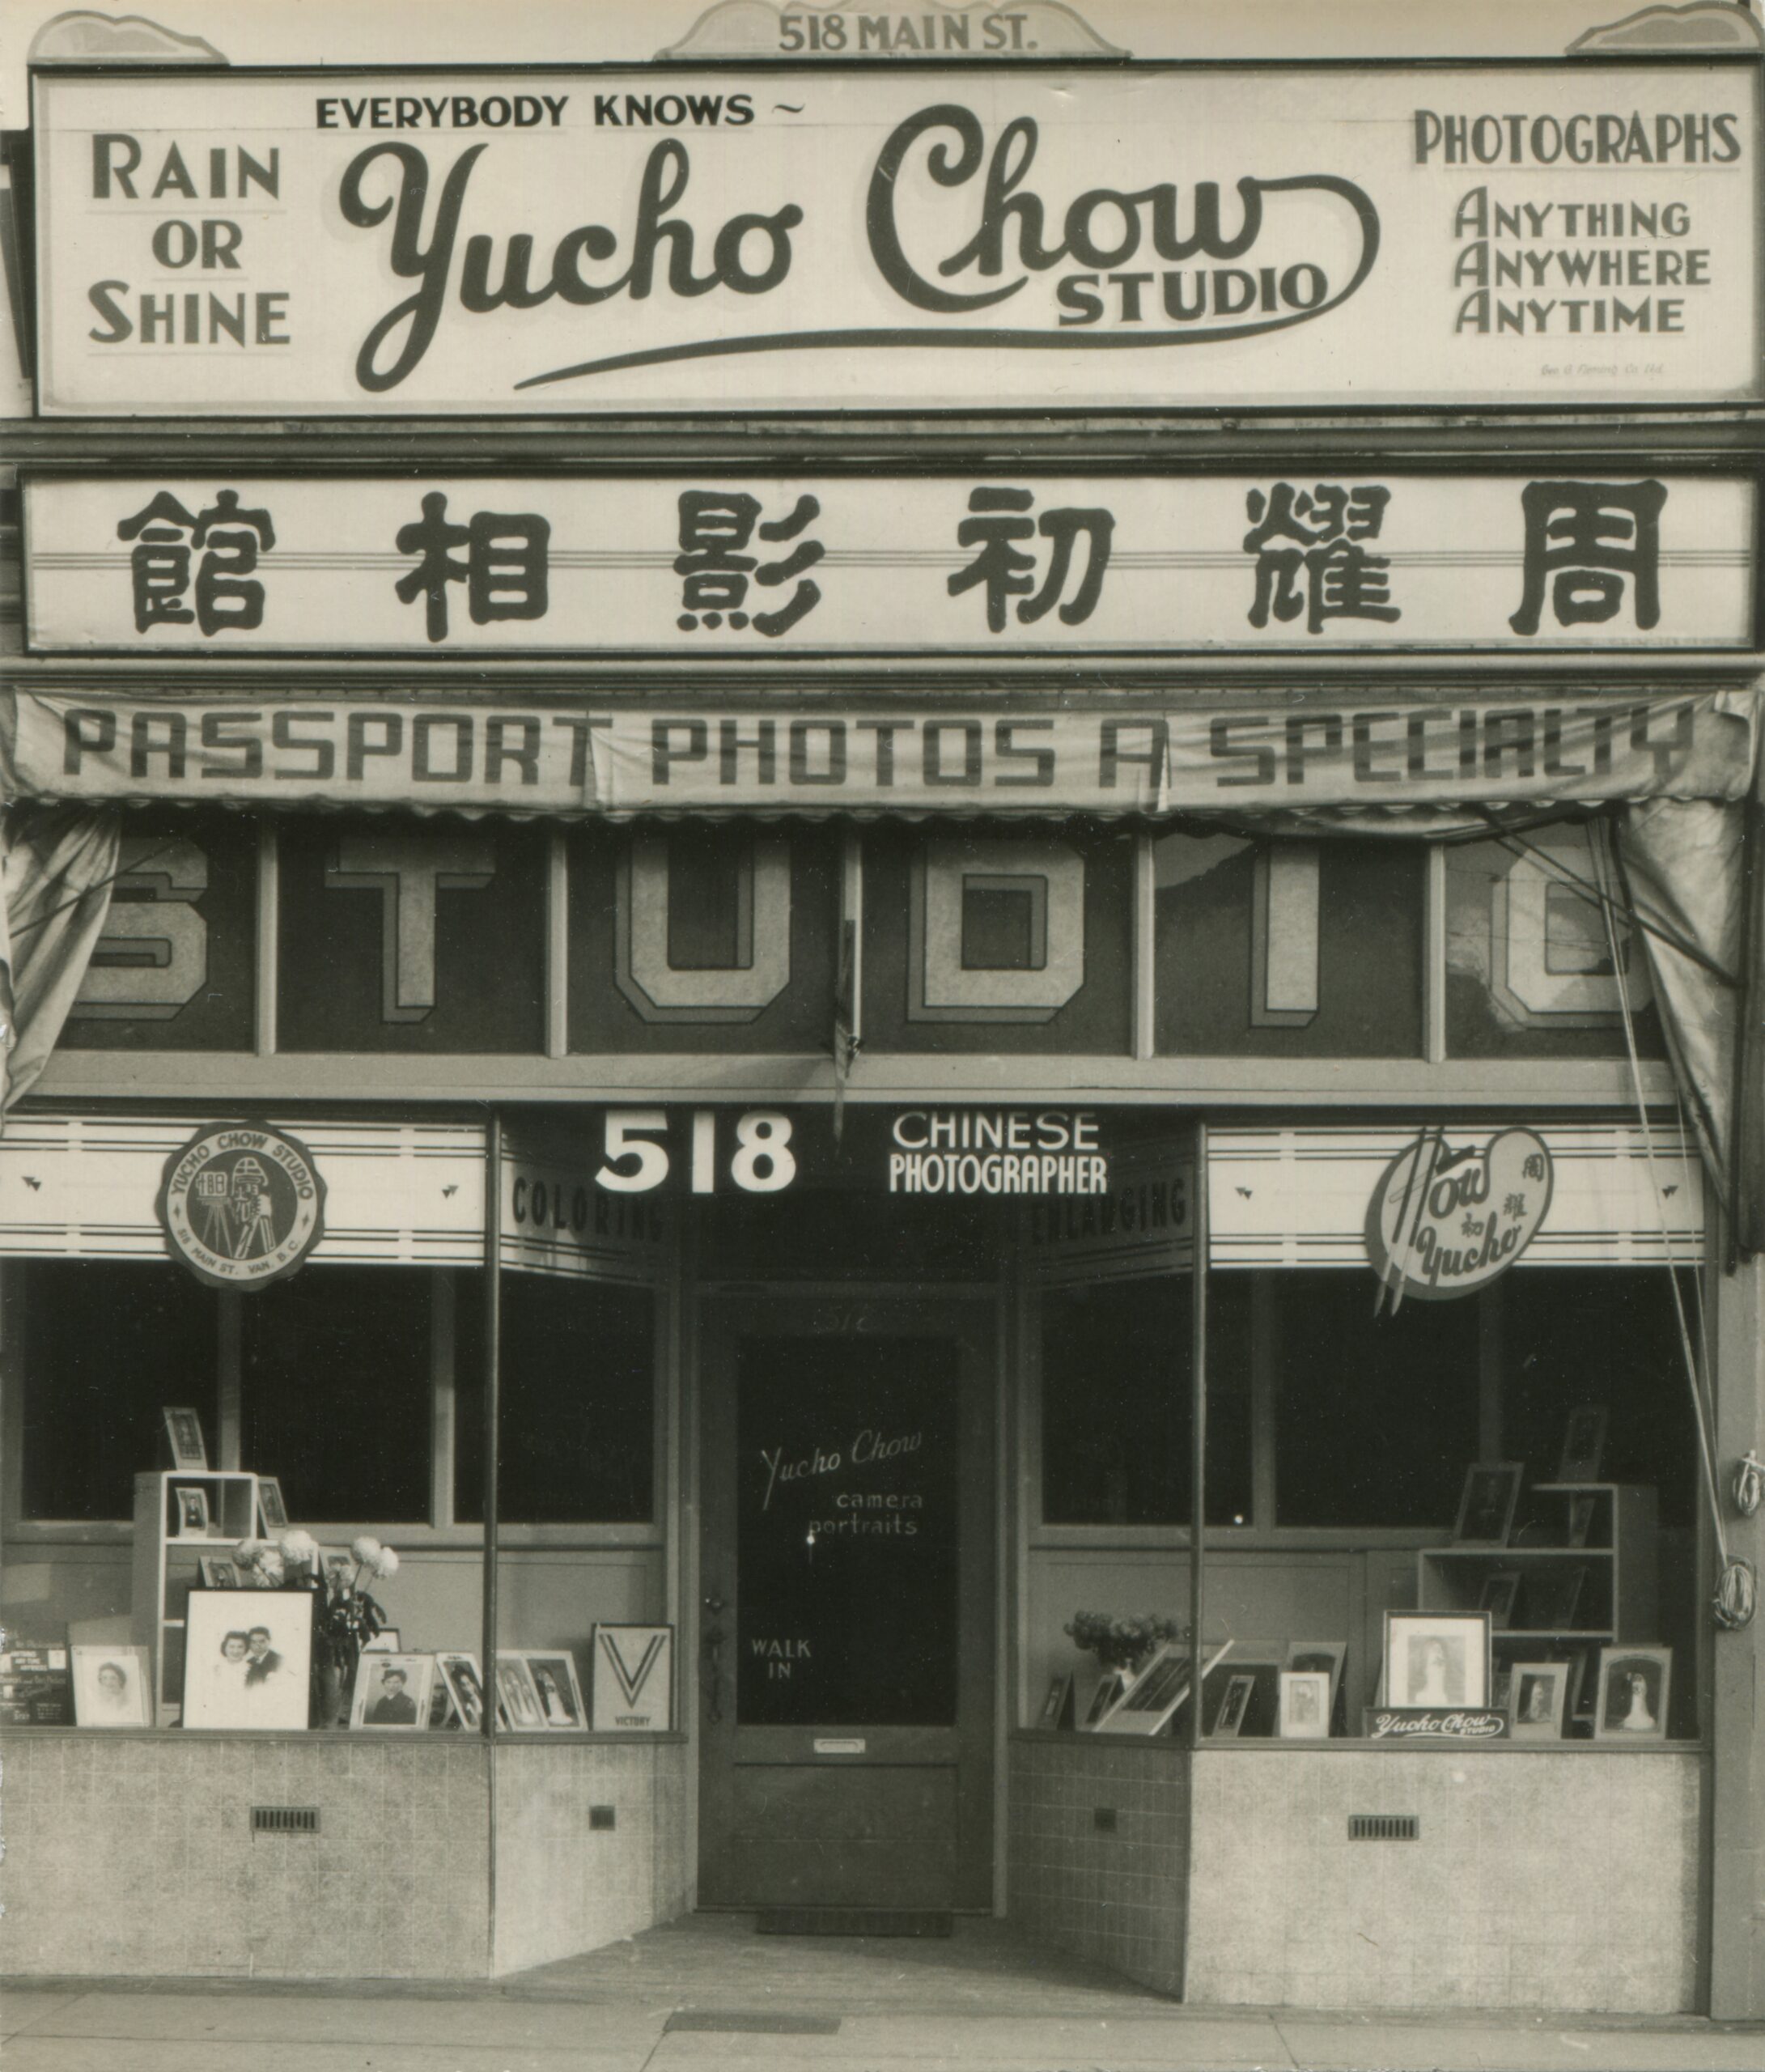 Yucho Chow Studio exterior, 1942. Reference code: AM1688-S2-F7-: 2021-034.651